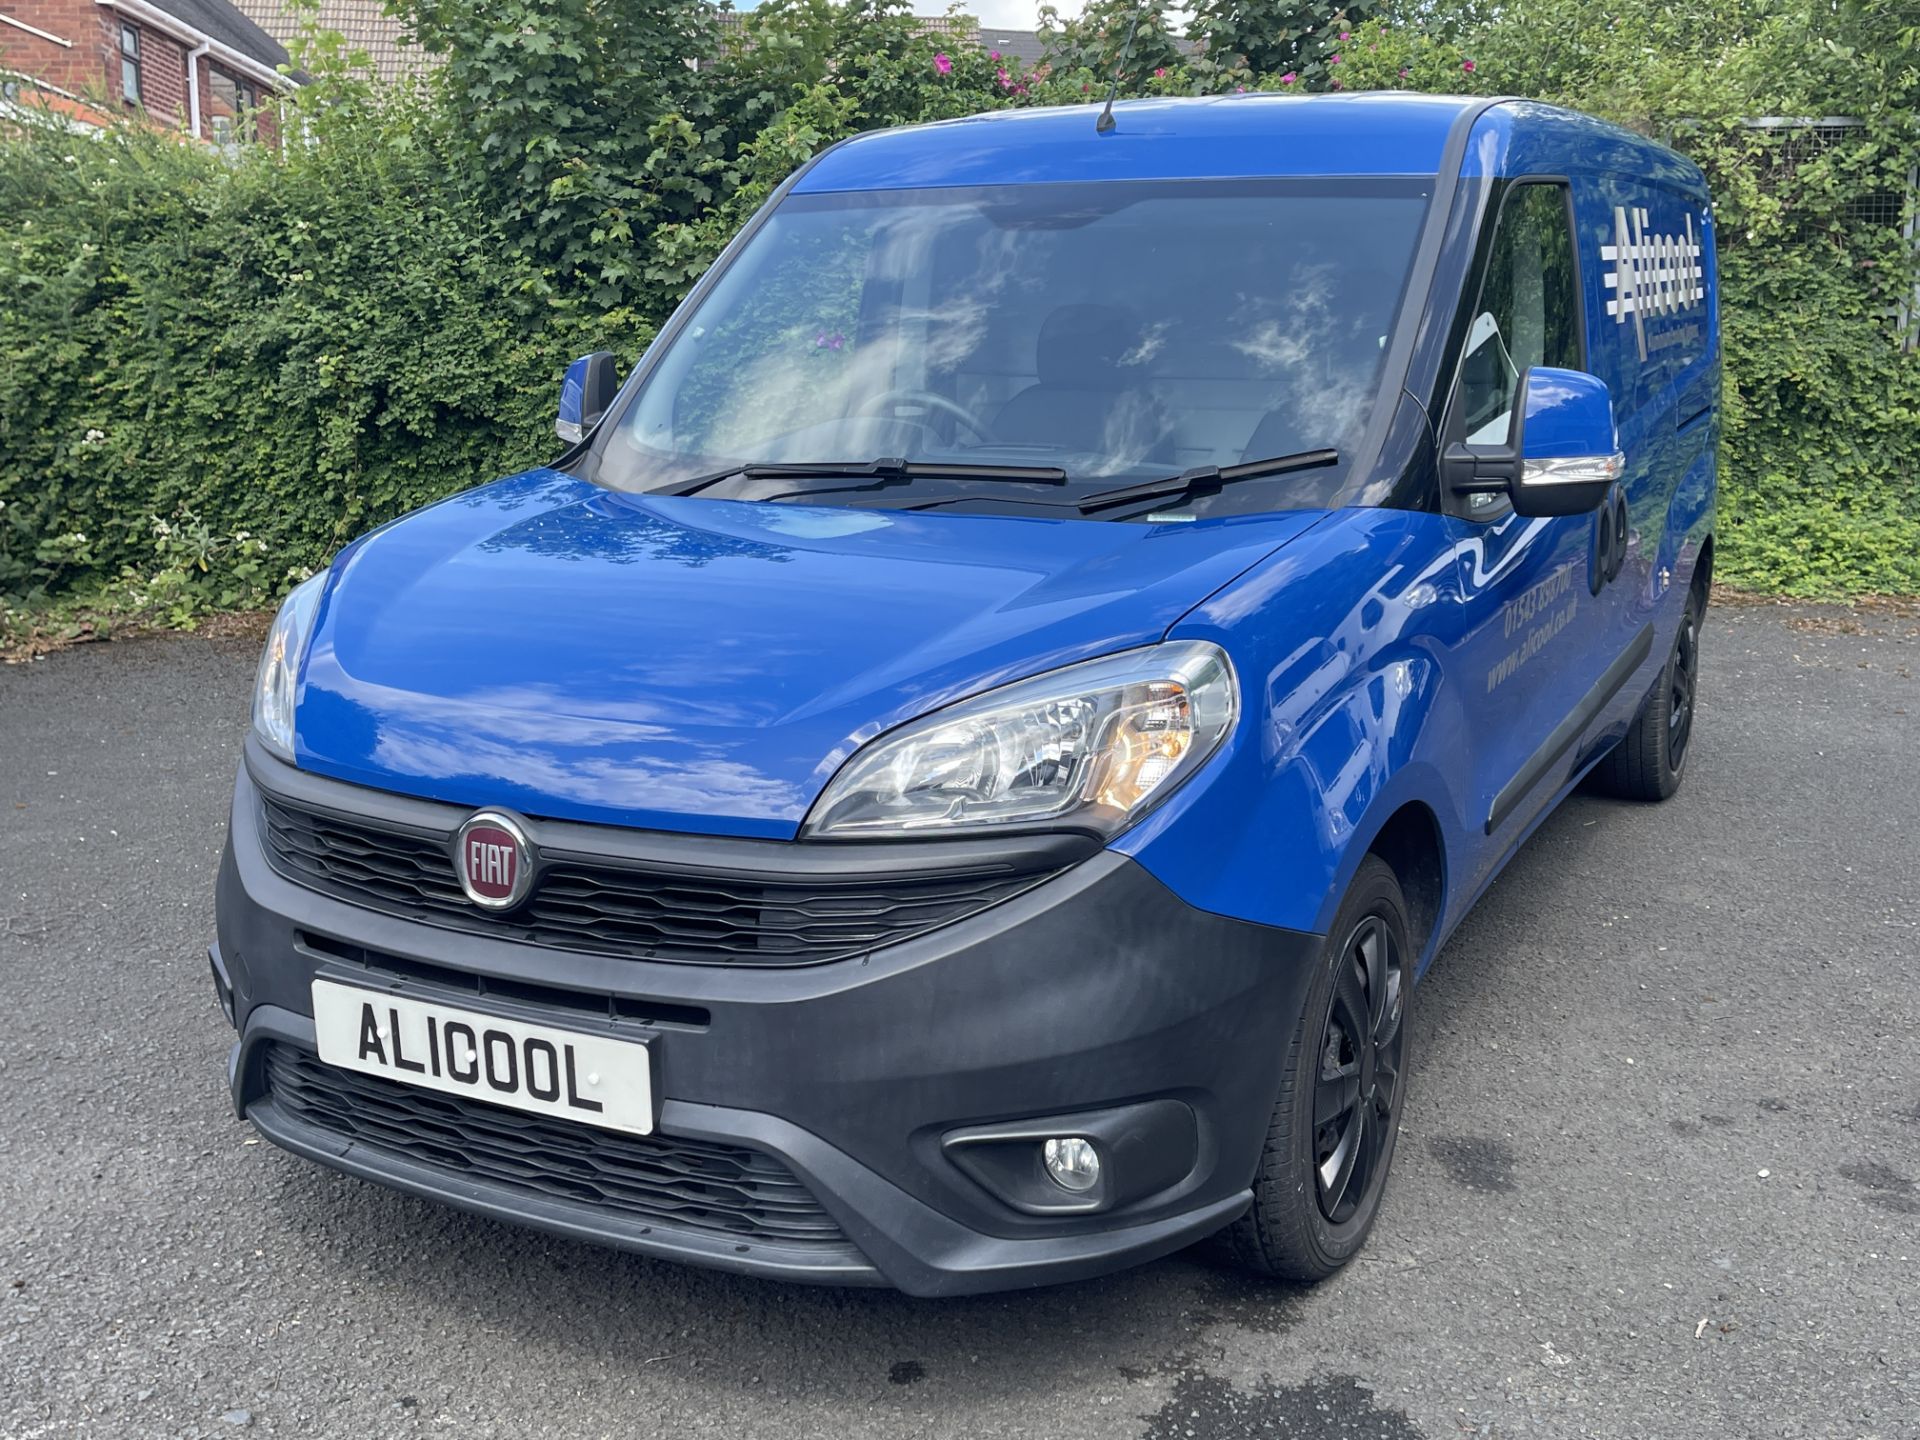 2016 - Fiat Doblo SX Mulijet 1,248cc Diesel Panel Van - High Level of Factory Options and Low Miles - Image 14 of 59